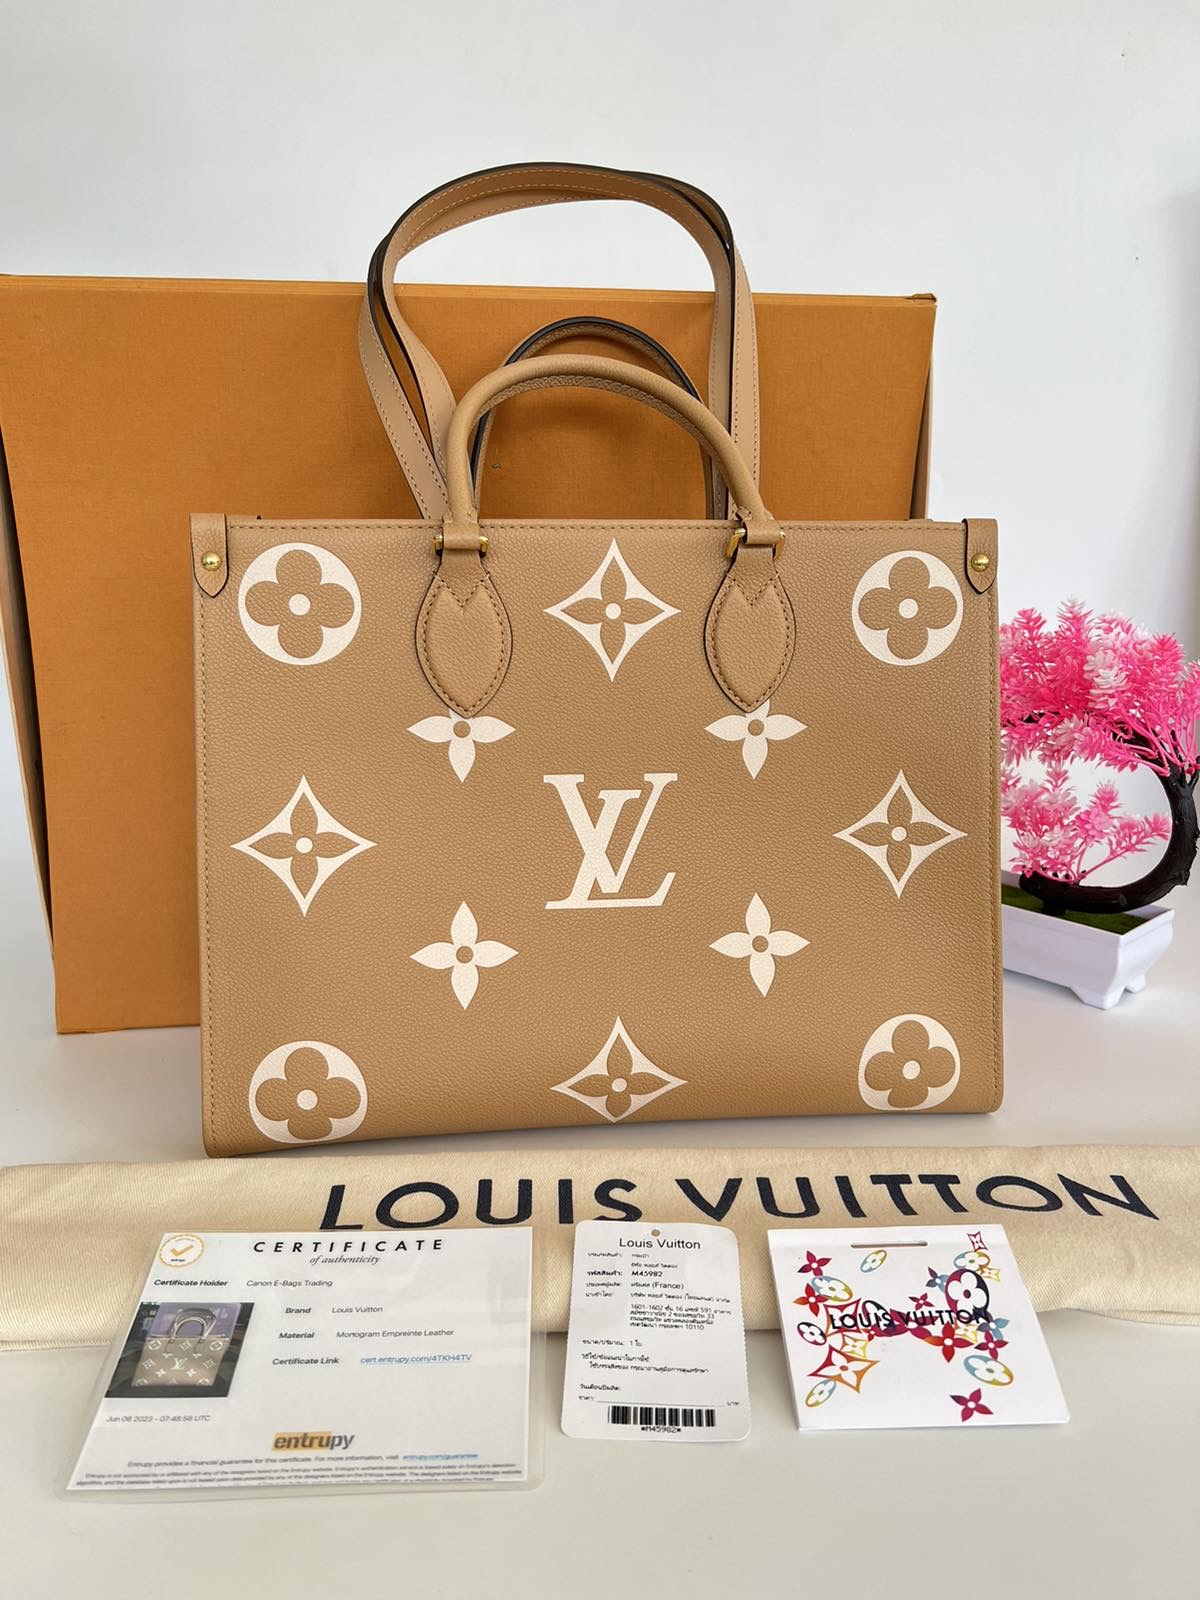 CHANEL AND LOUIS VUITTON MICROCHIP